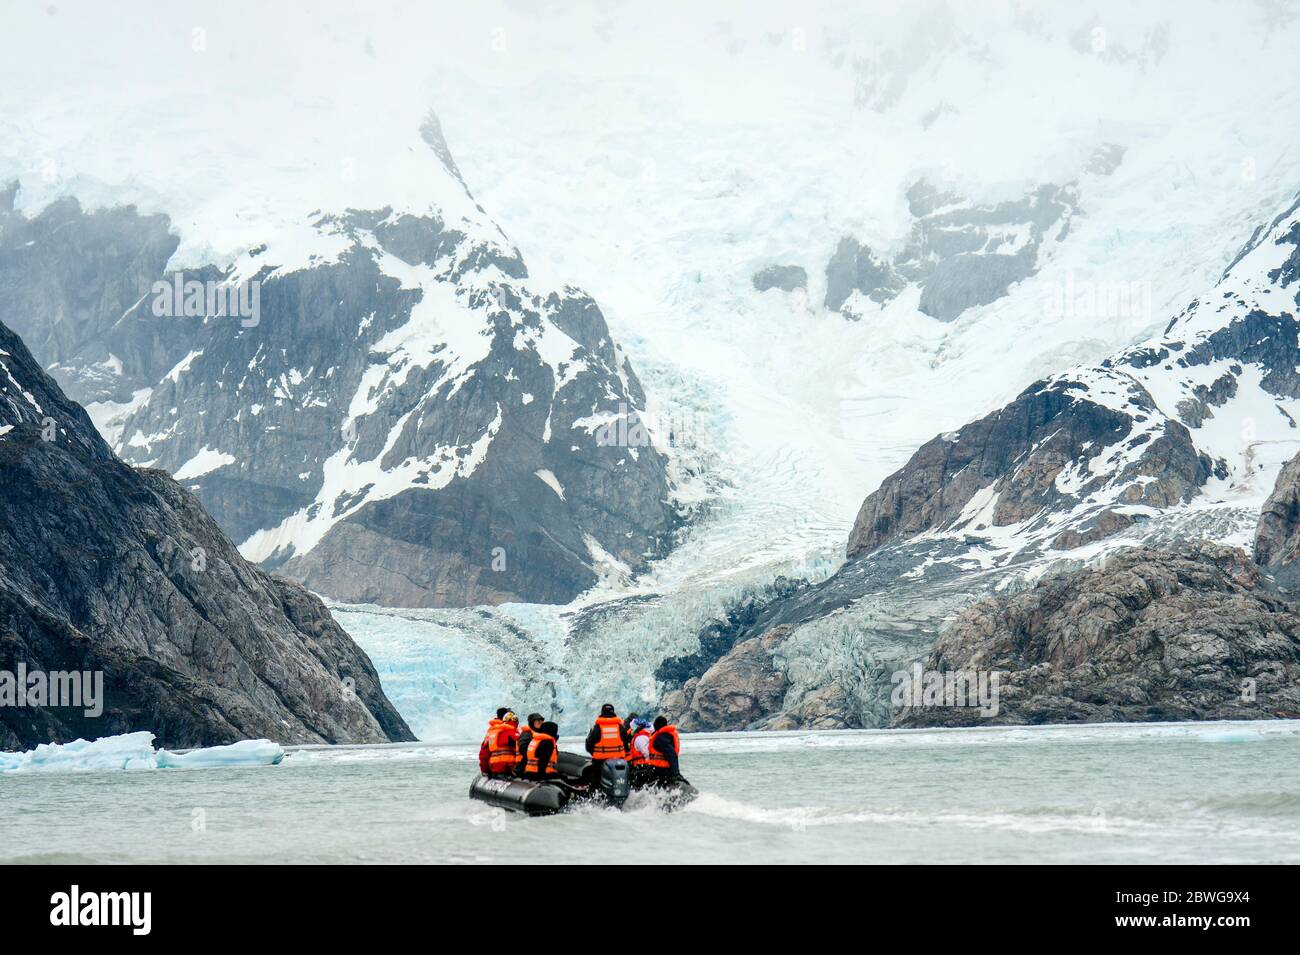 Winter motorboat trip on river in snowy mountain landscape, Patagonia, Chile, South America Stock Photo